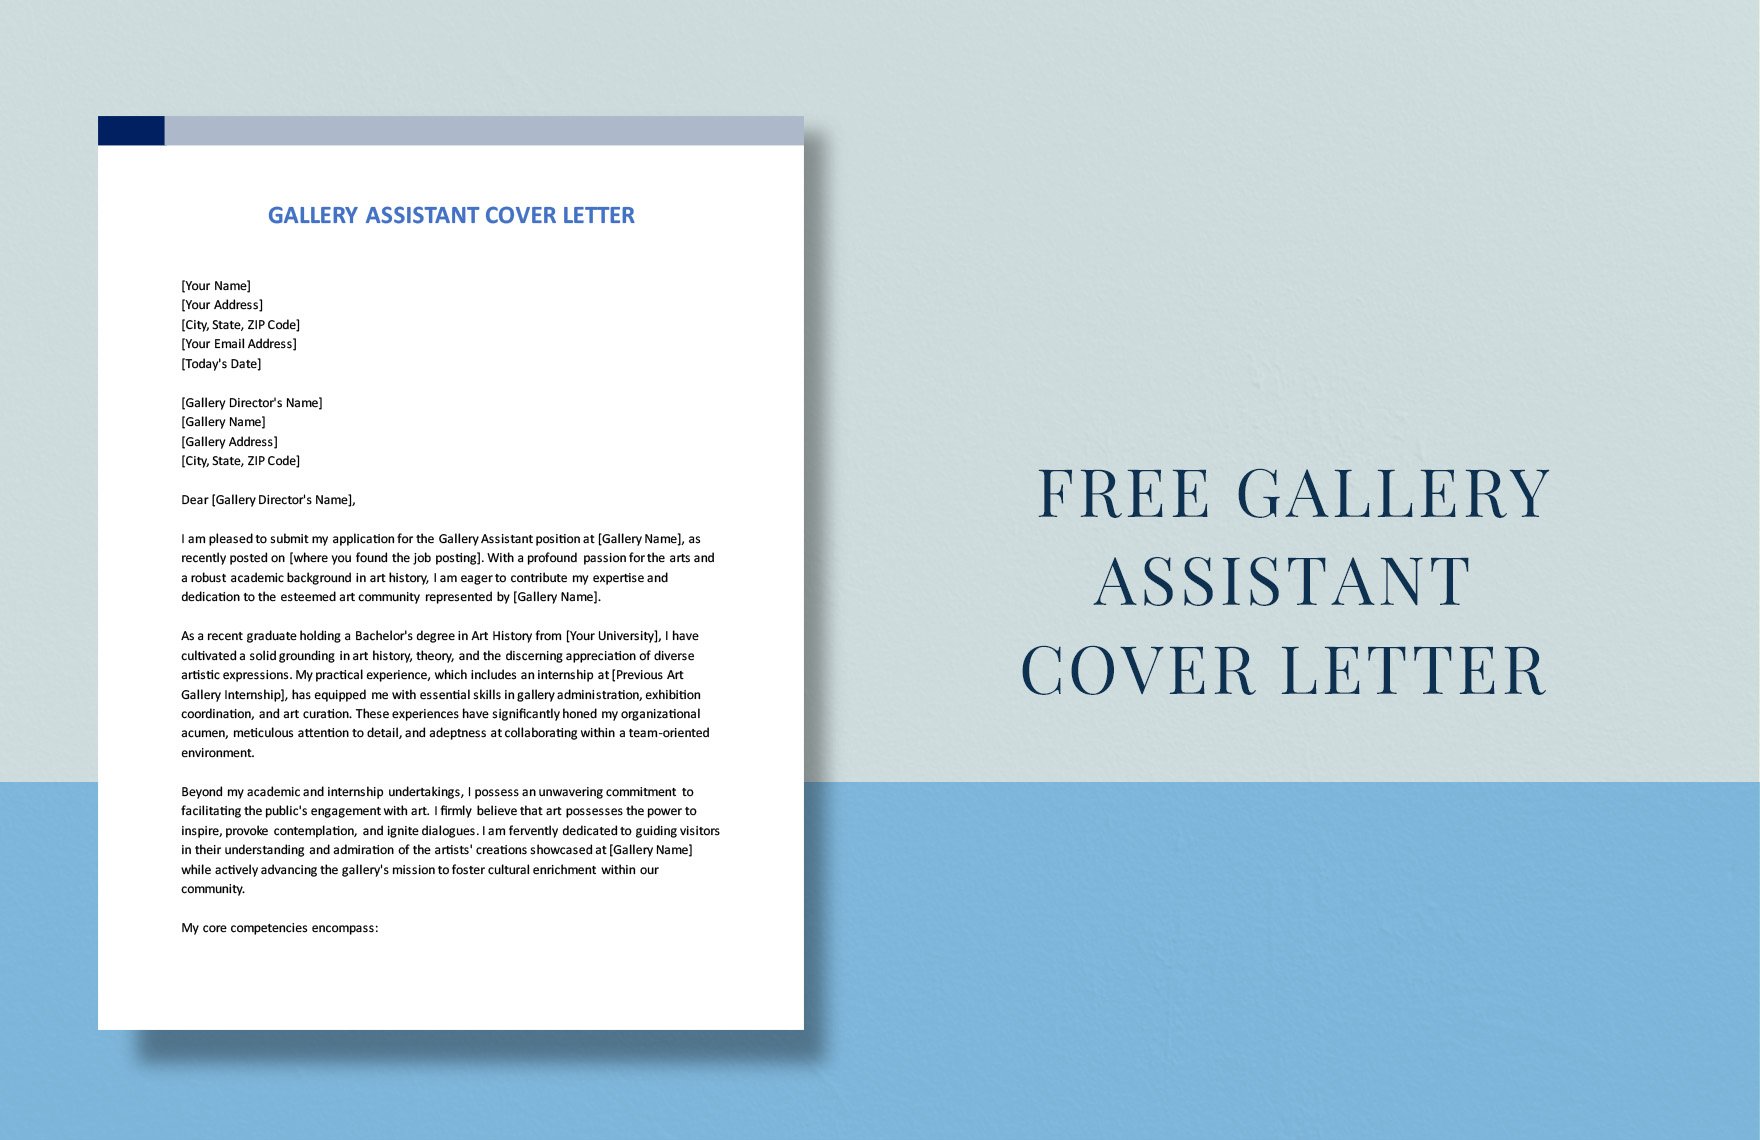 Gallery Assistant Cover Letter in Word, Google Docs, PDF